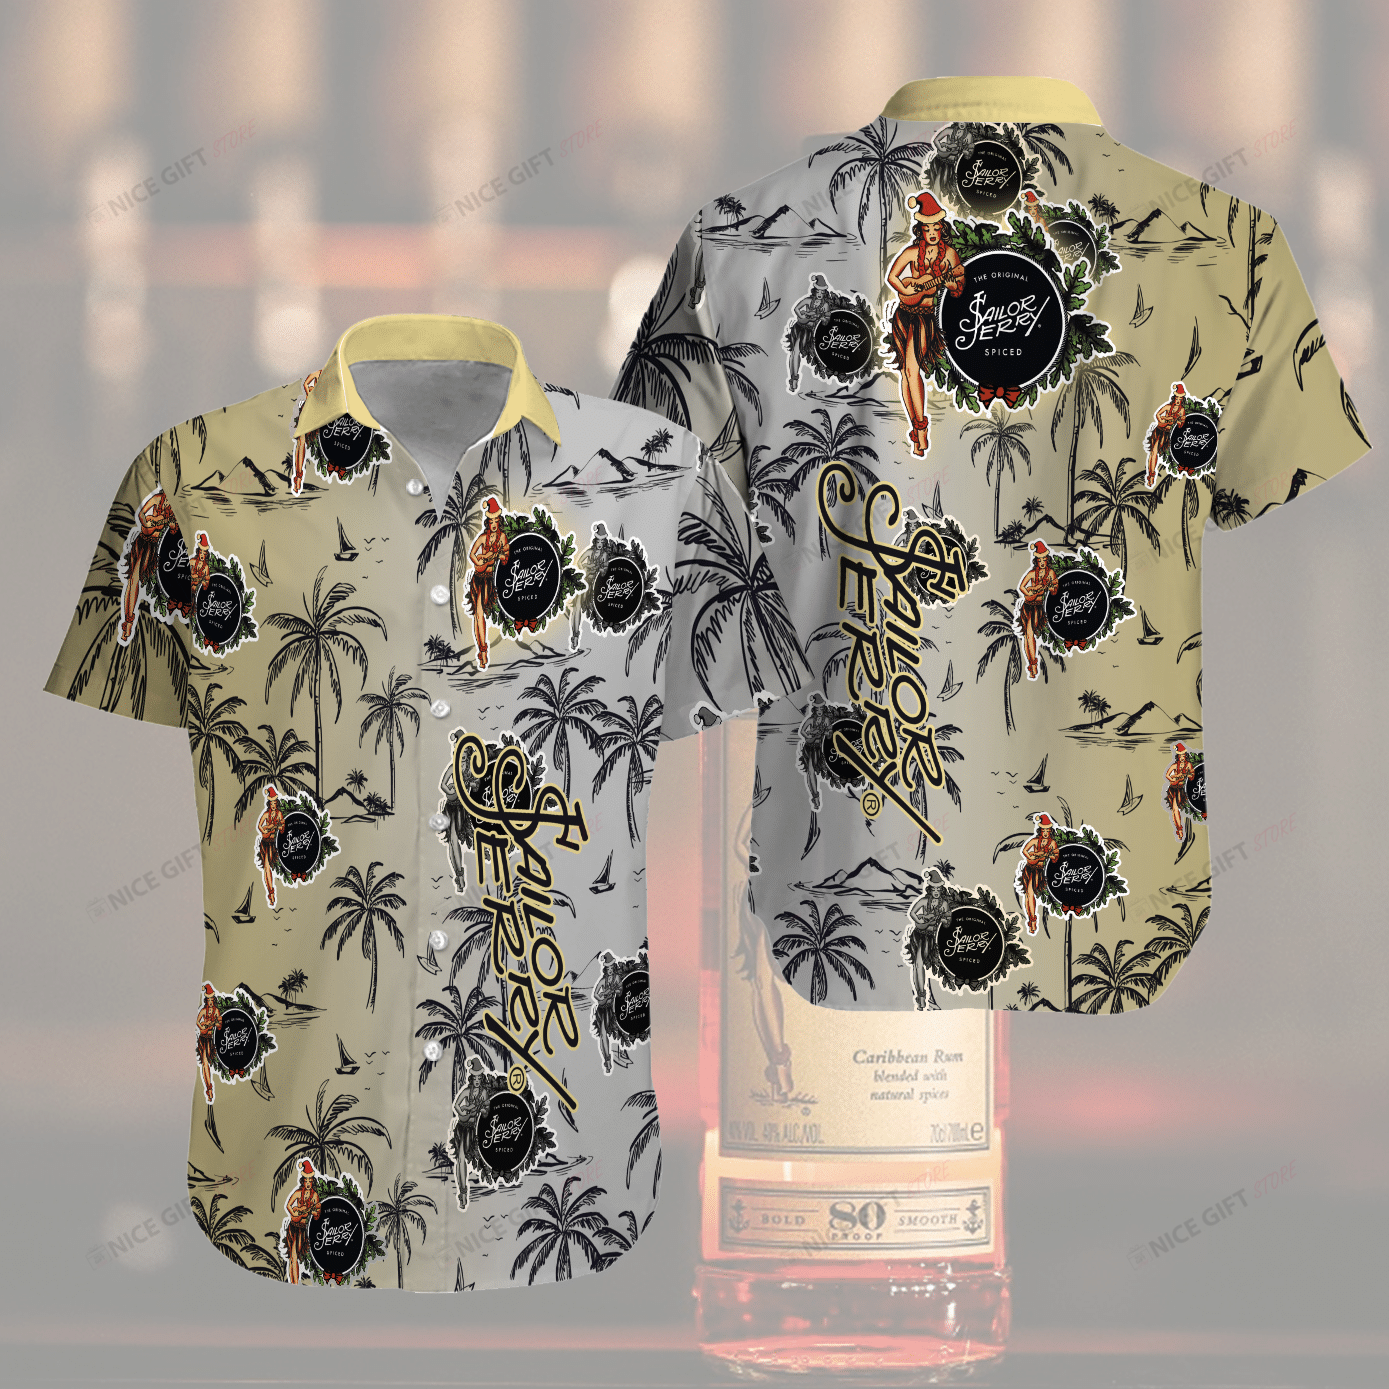 Check out our latest Hawaii Shirt! 9